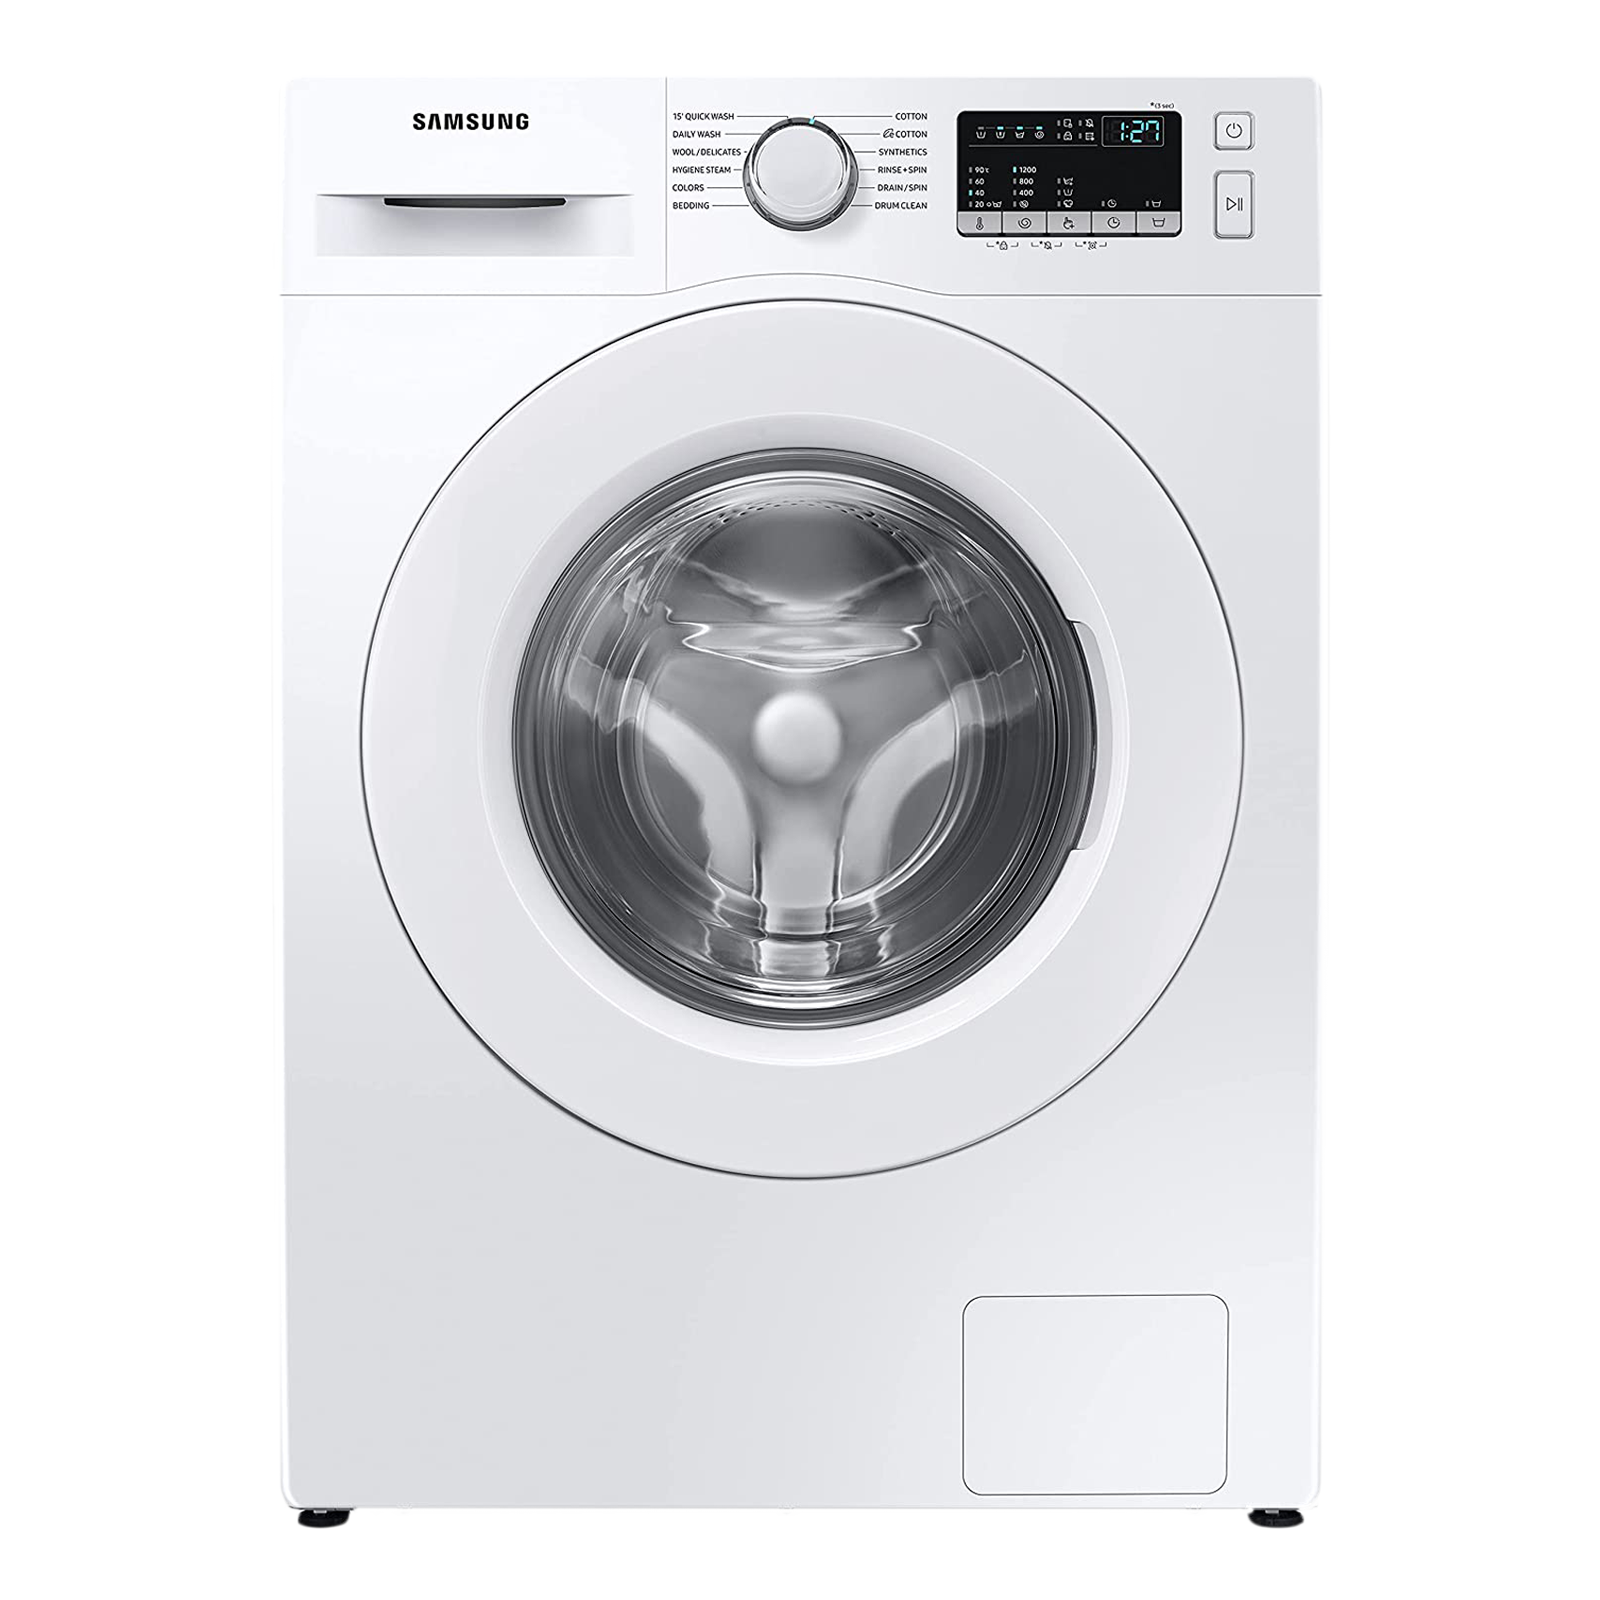 SAMSUNG 7 kg 5 Star Inverter Fully Automatic Front Load Washing Machine (WW70T4020EE/TL, Diamond Drum, White)_1